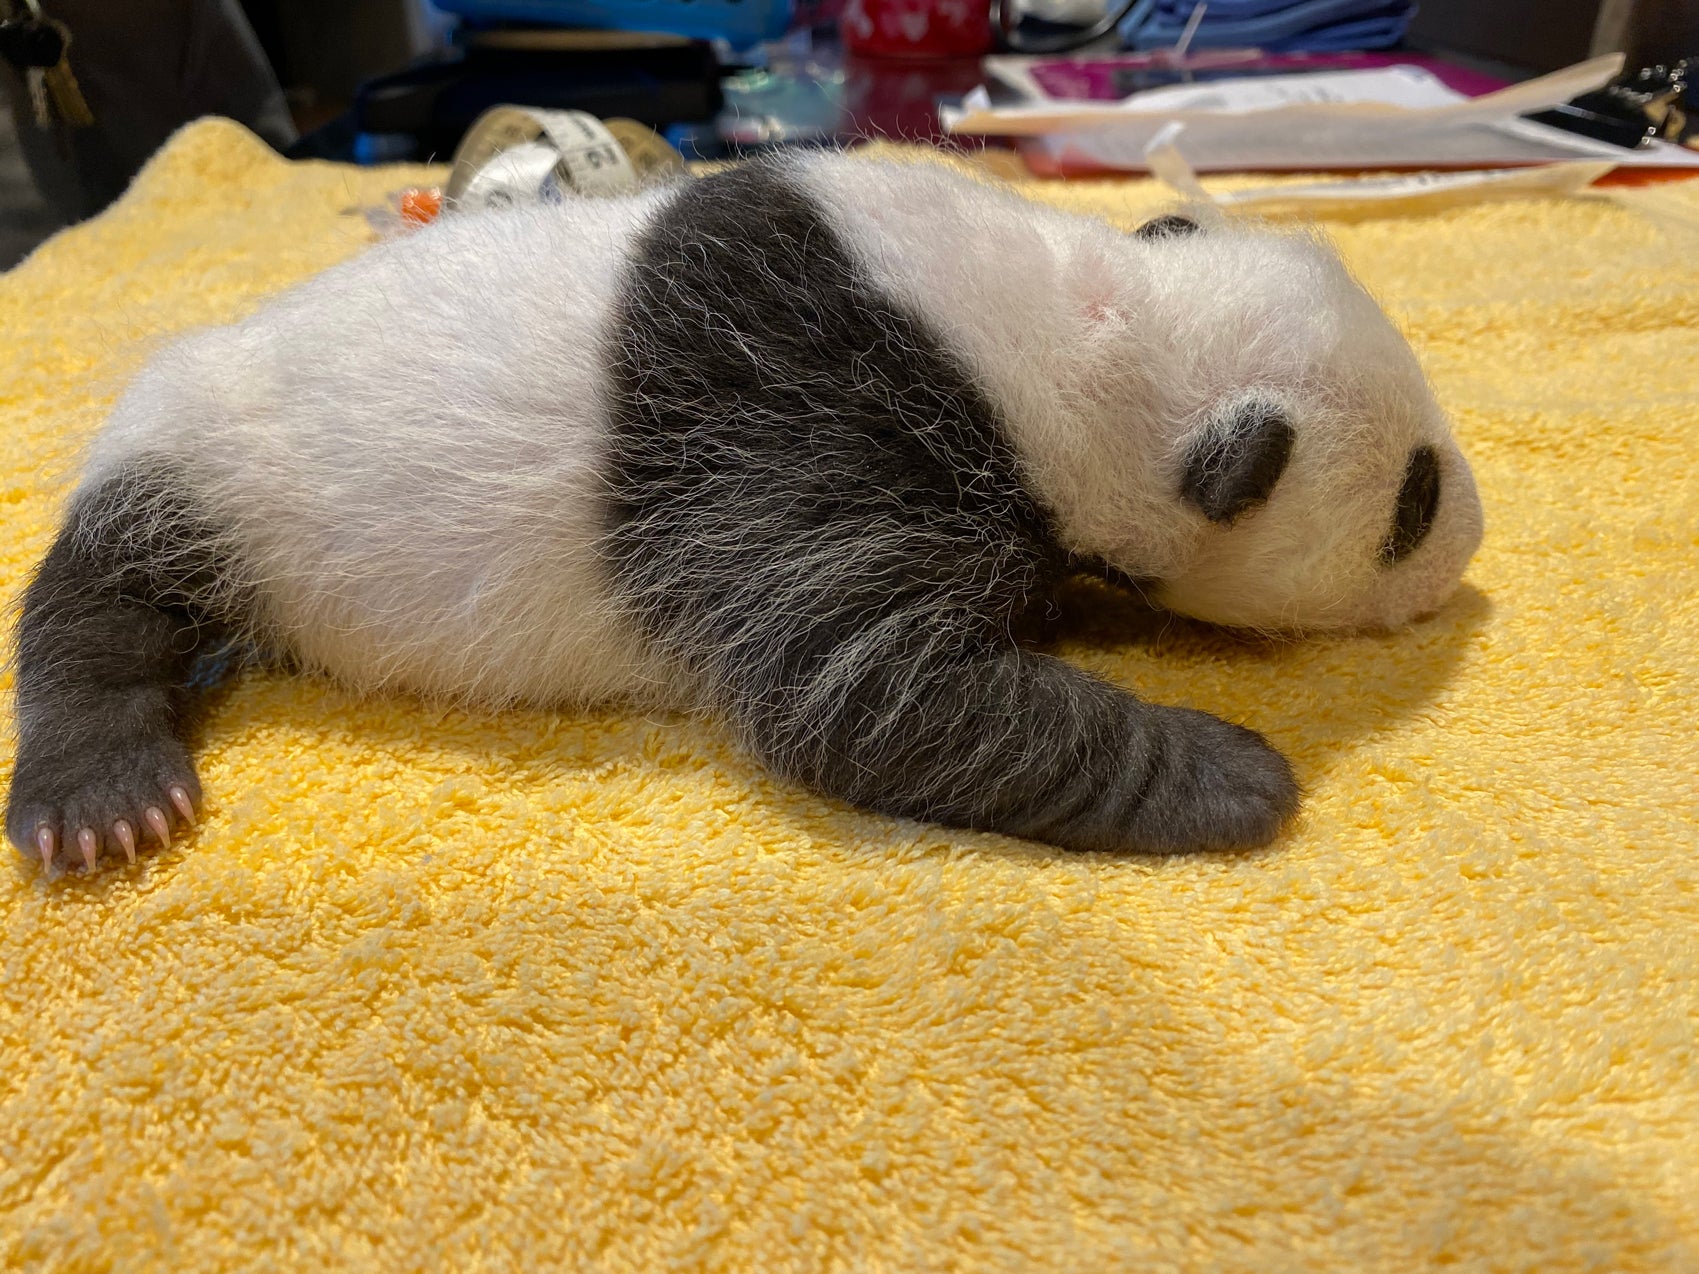 The Smithsonian's National Zoo's giant panda cub rests on a soft towel during its first veterinary exam Sept. 19, 2020.